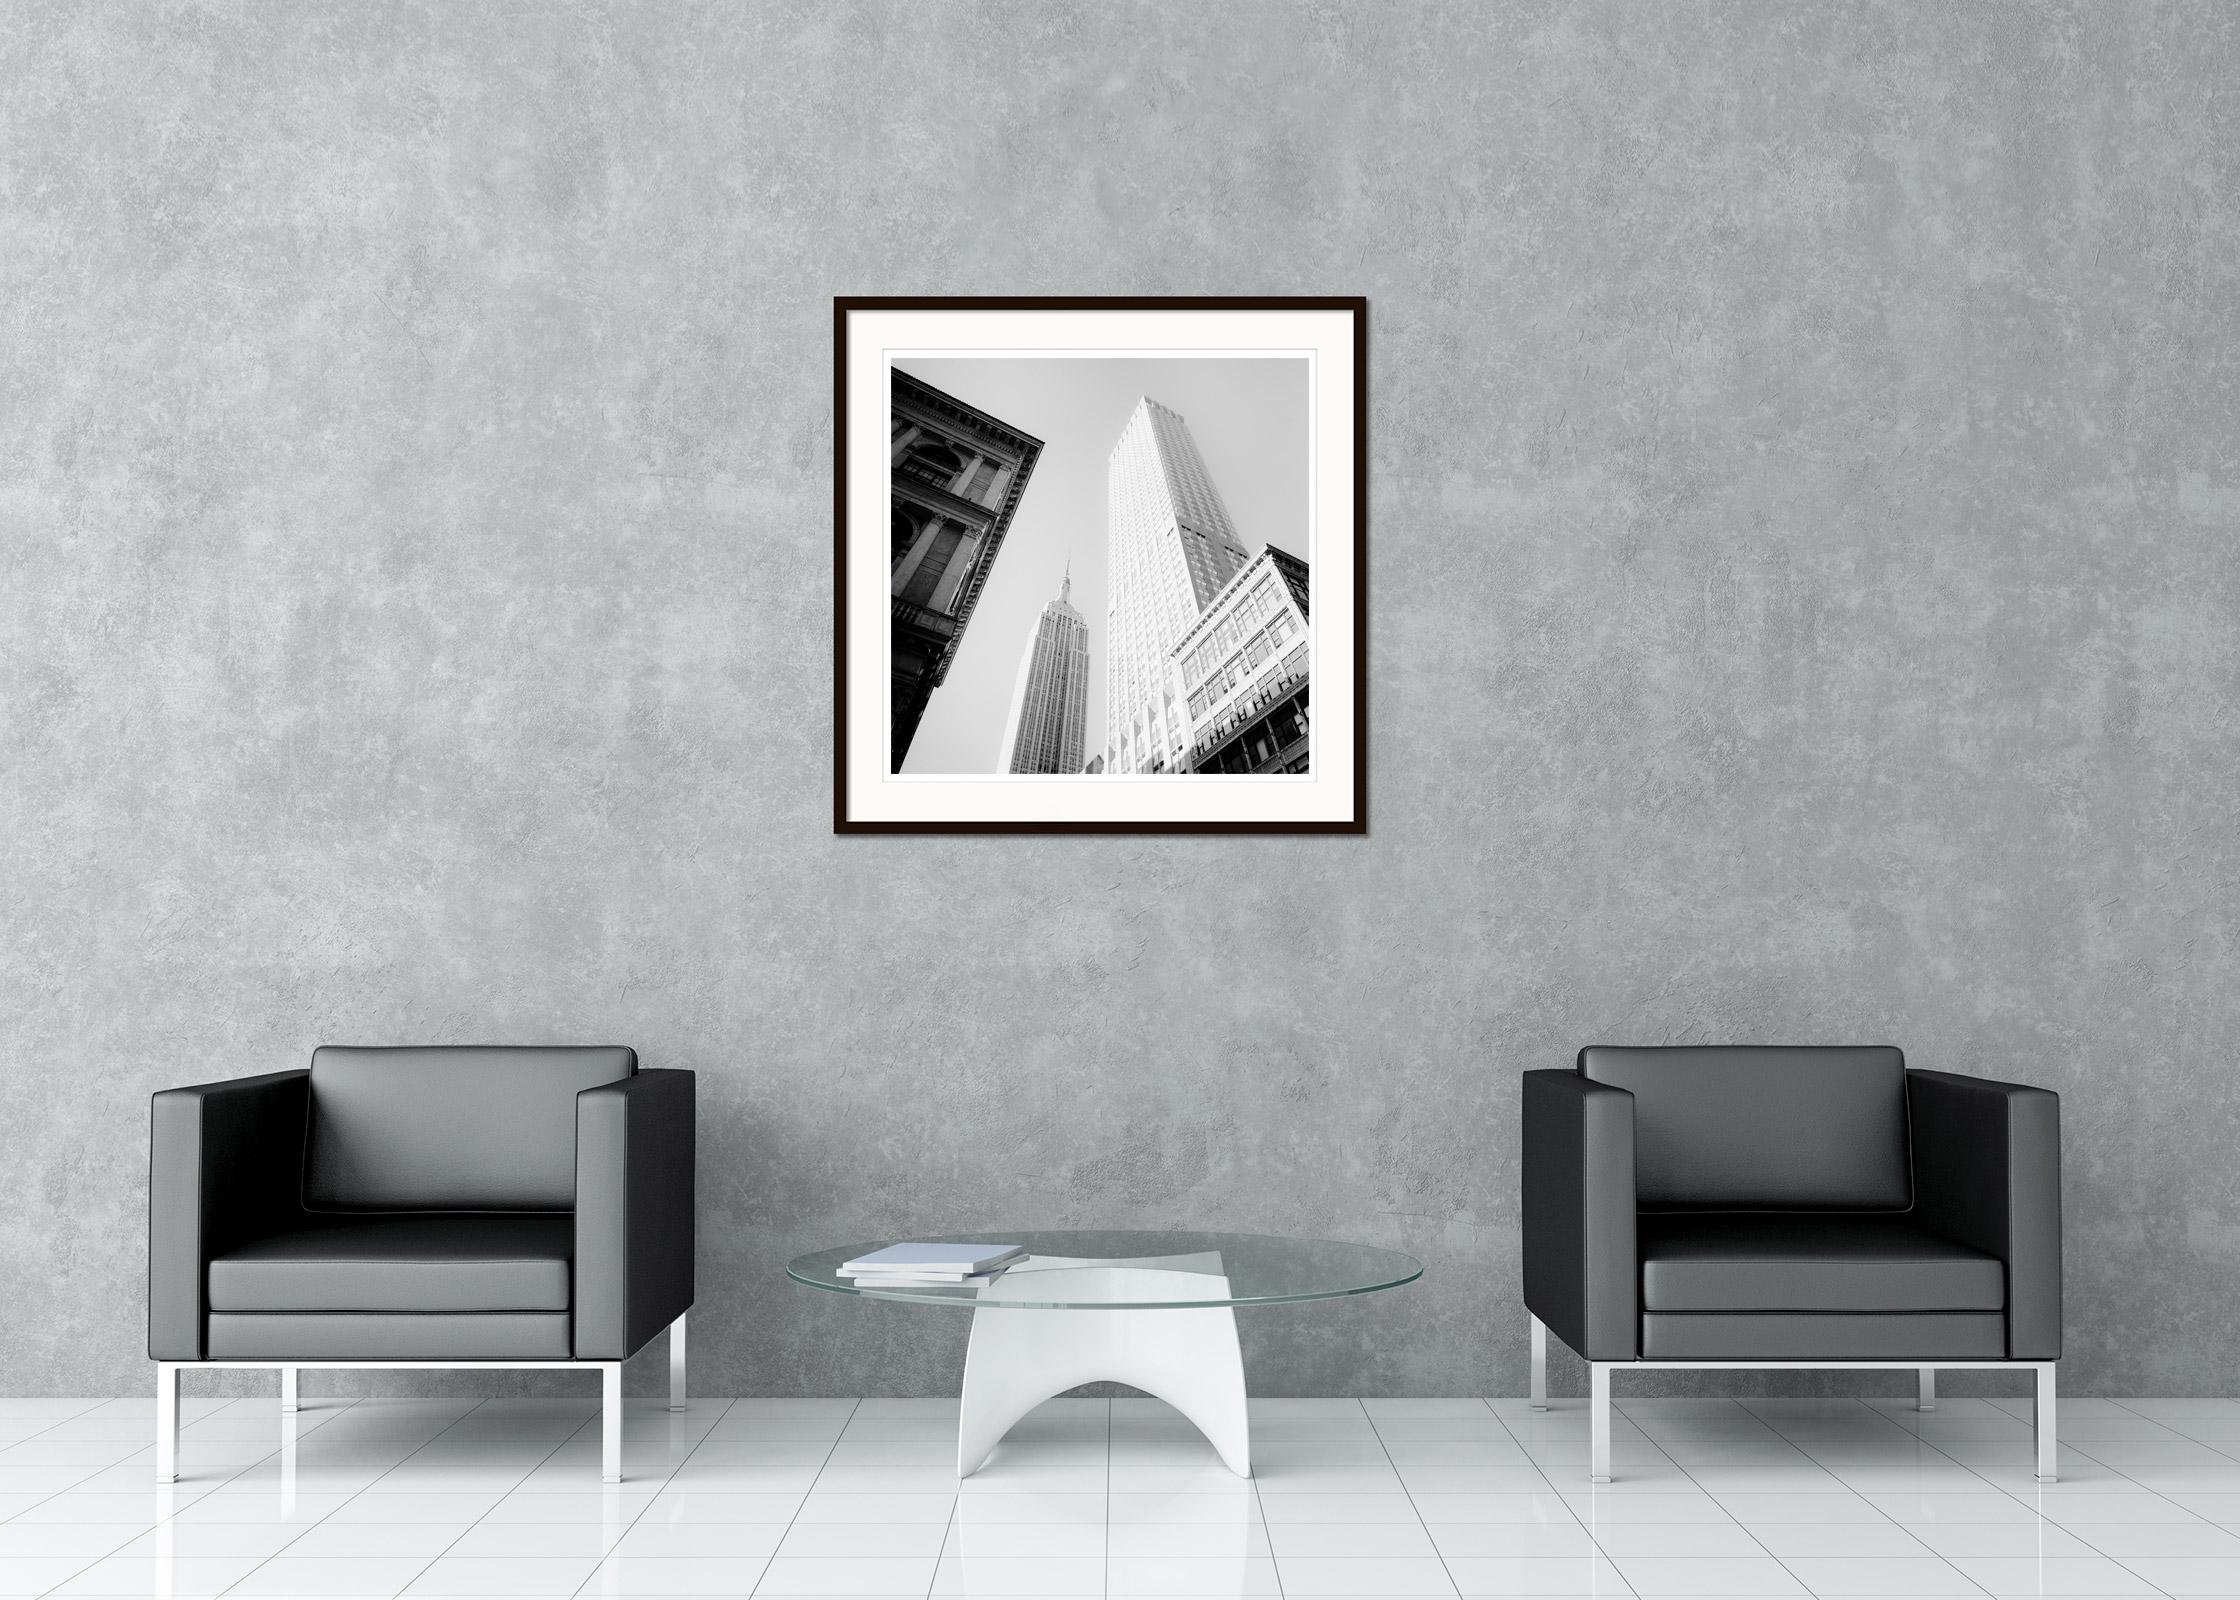 Black and white fine art cityscape - landscape photography. Archival pigment ink print, edition of 9. Signed, titled, dated and numbered by artist. Certificate of authenticity included. Printed with 4cm white border.
International award winner